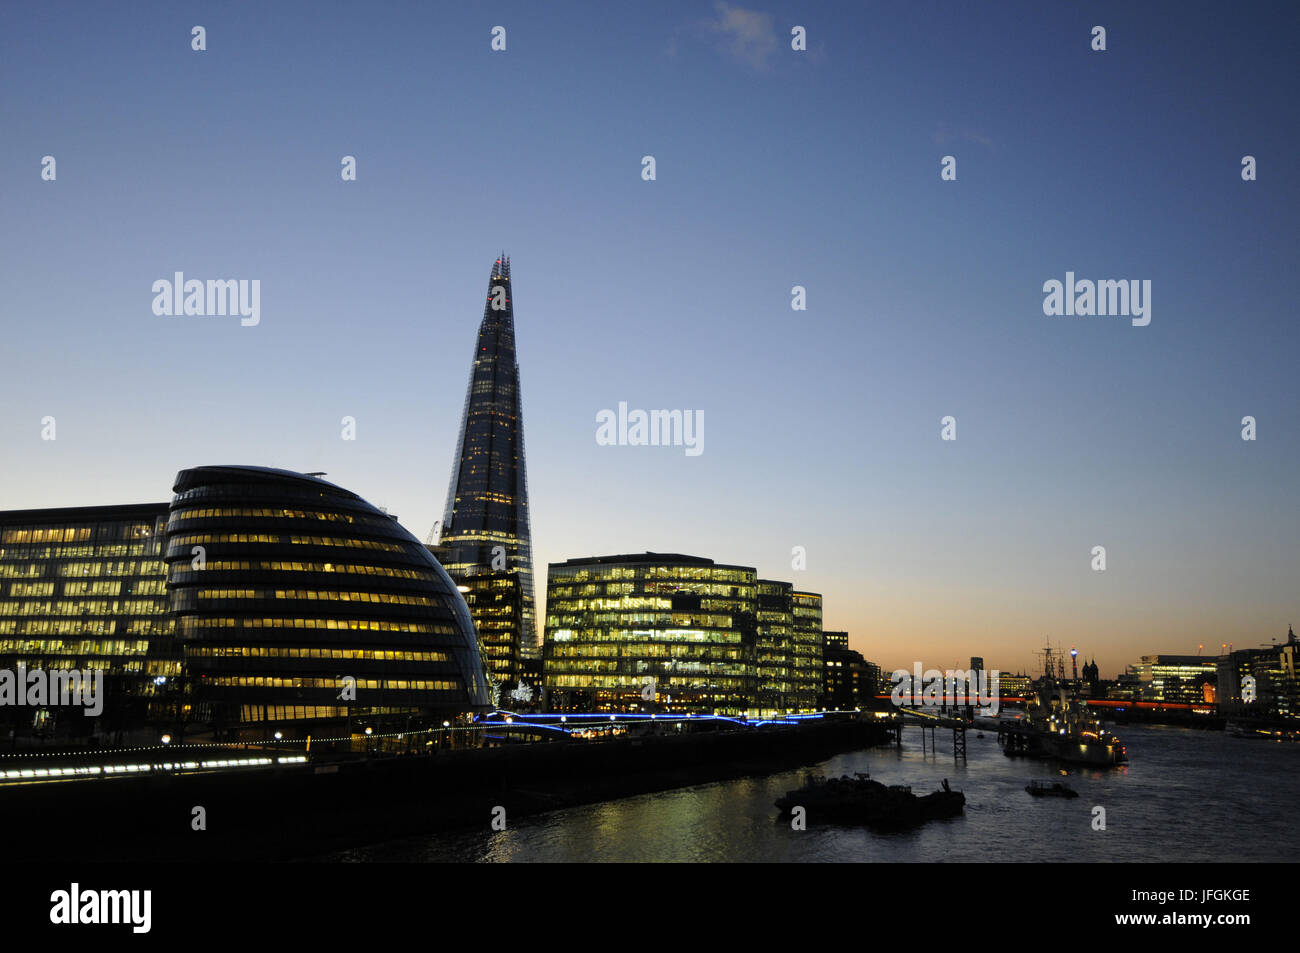 View along River Thames to City Hall and The Shard at Dusk with HMS Belfast moored in the Thames, London, England Stock Photo